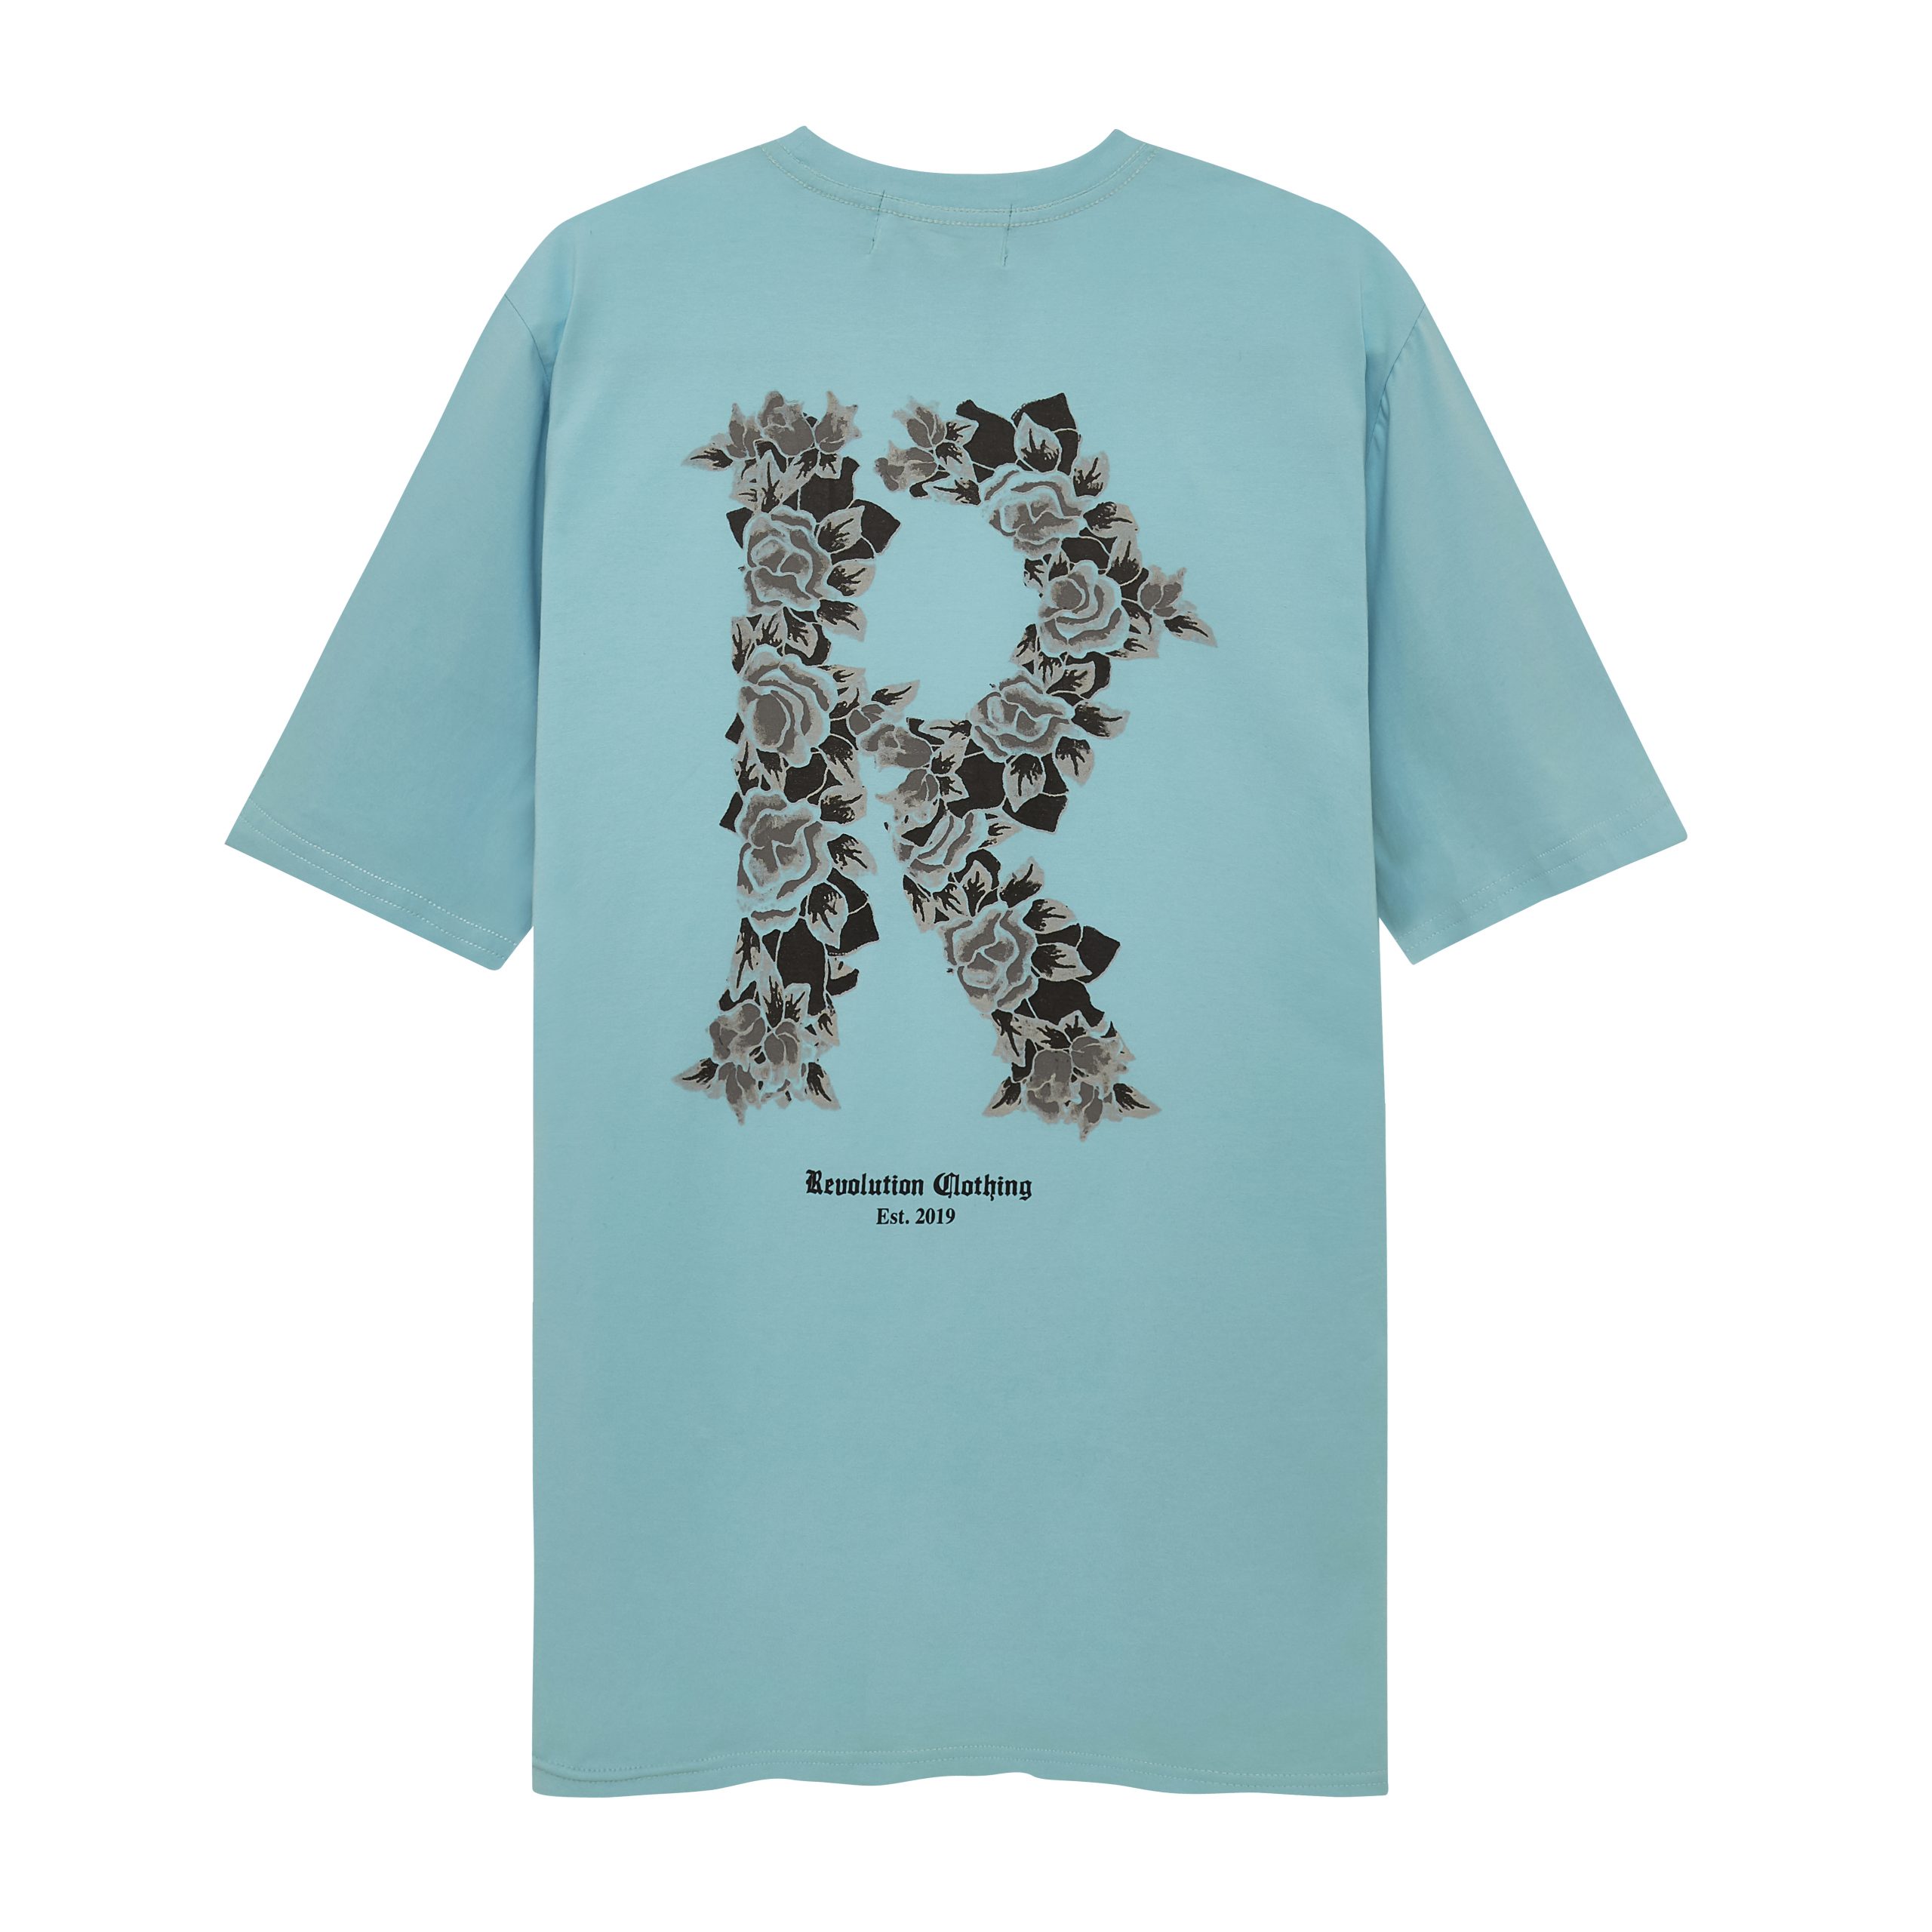 Rose Baby Blue T-shirt OVERSIZE FIT